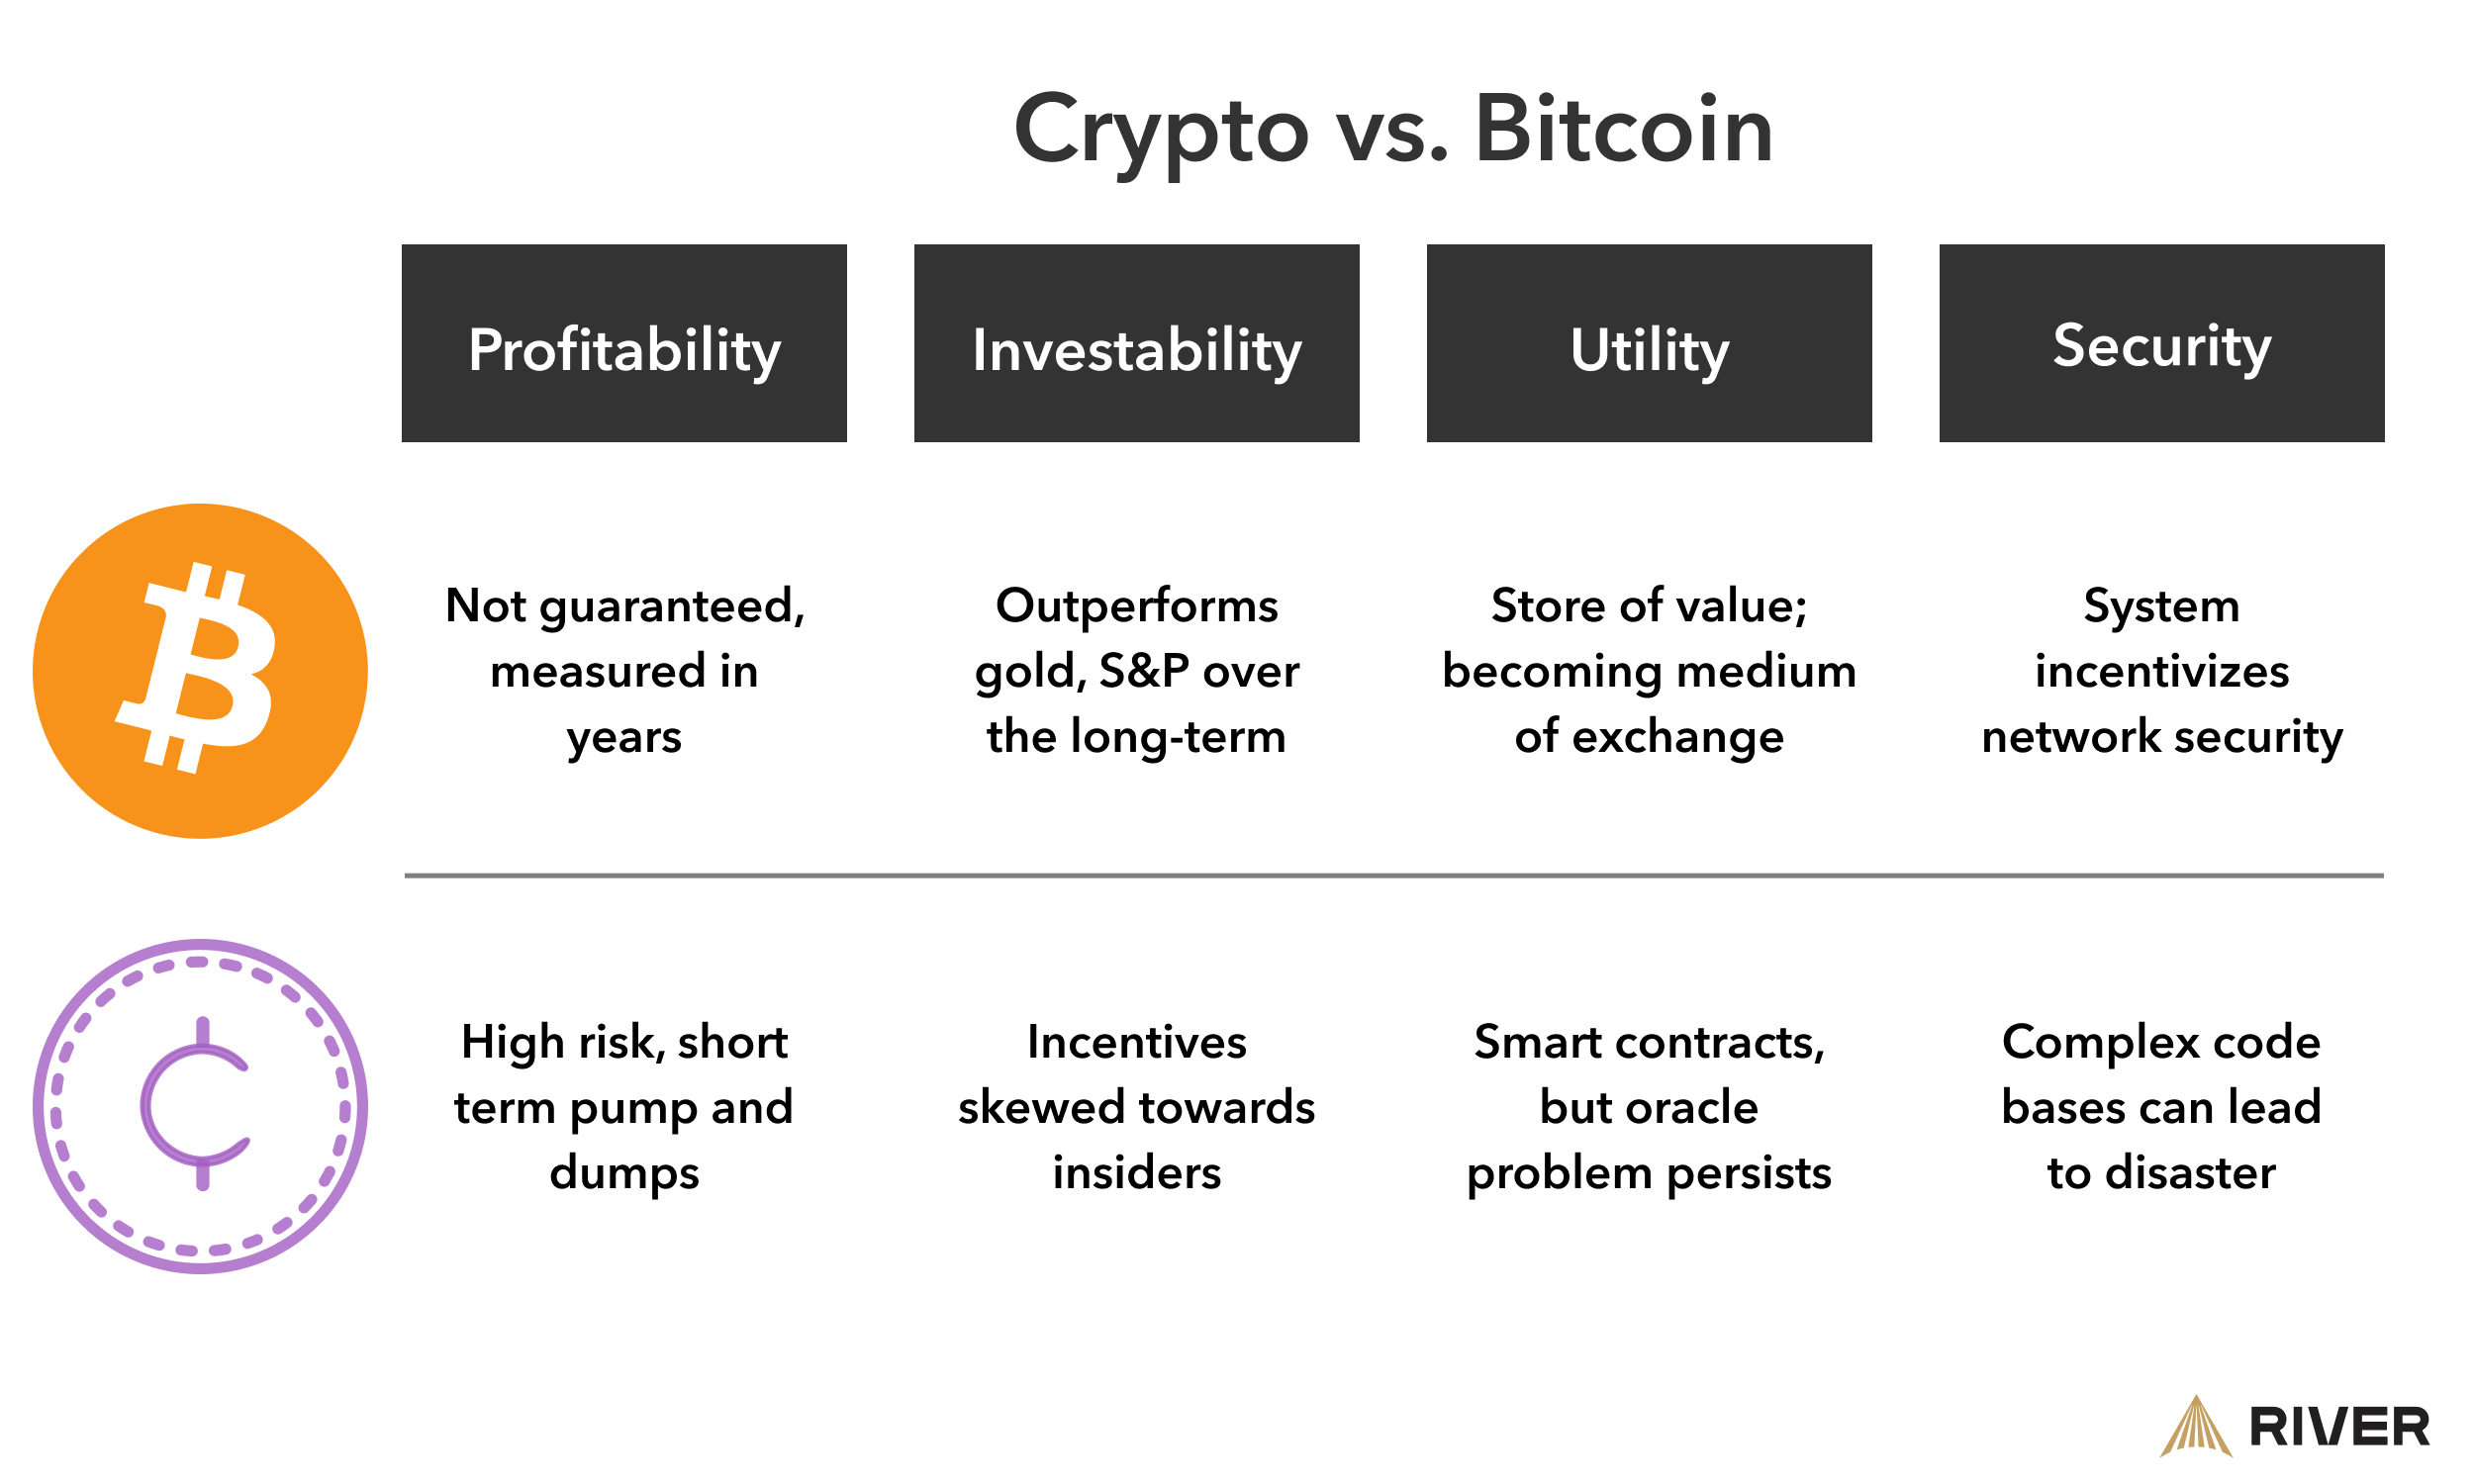 Final Crypto vs Bitcoin comparison graphic with text instead of question mark icons